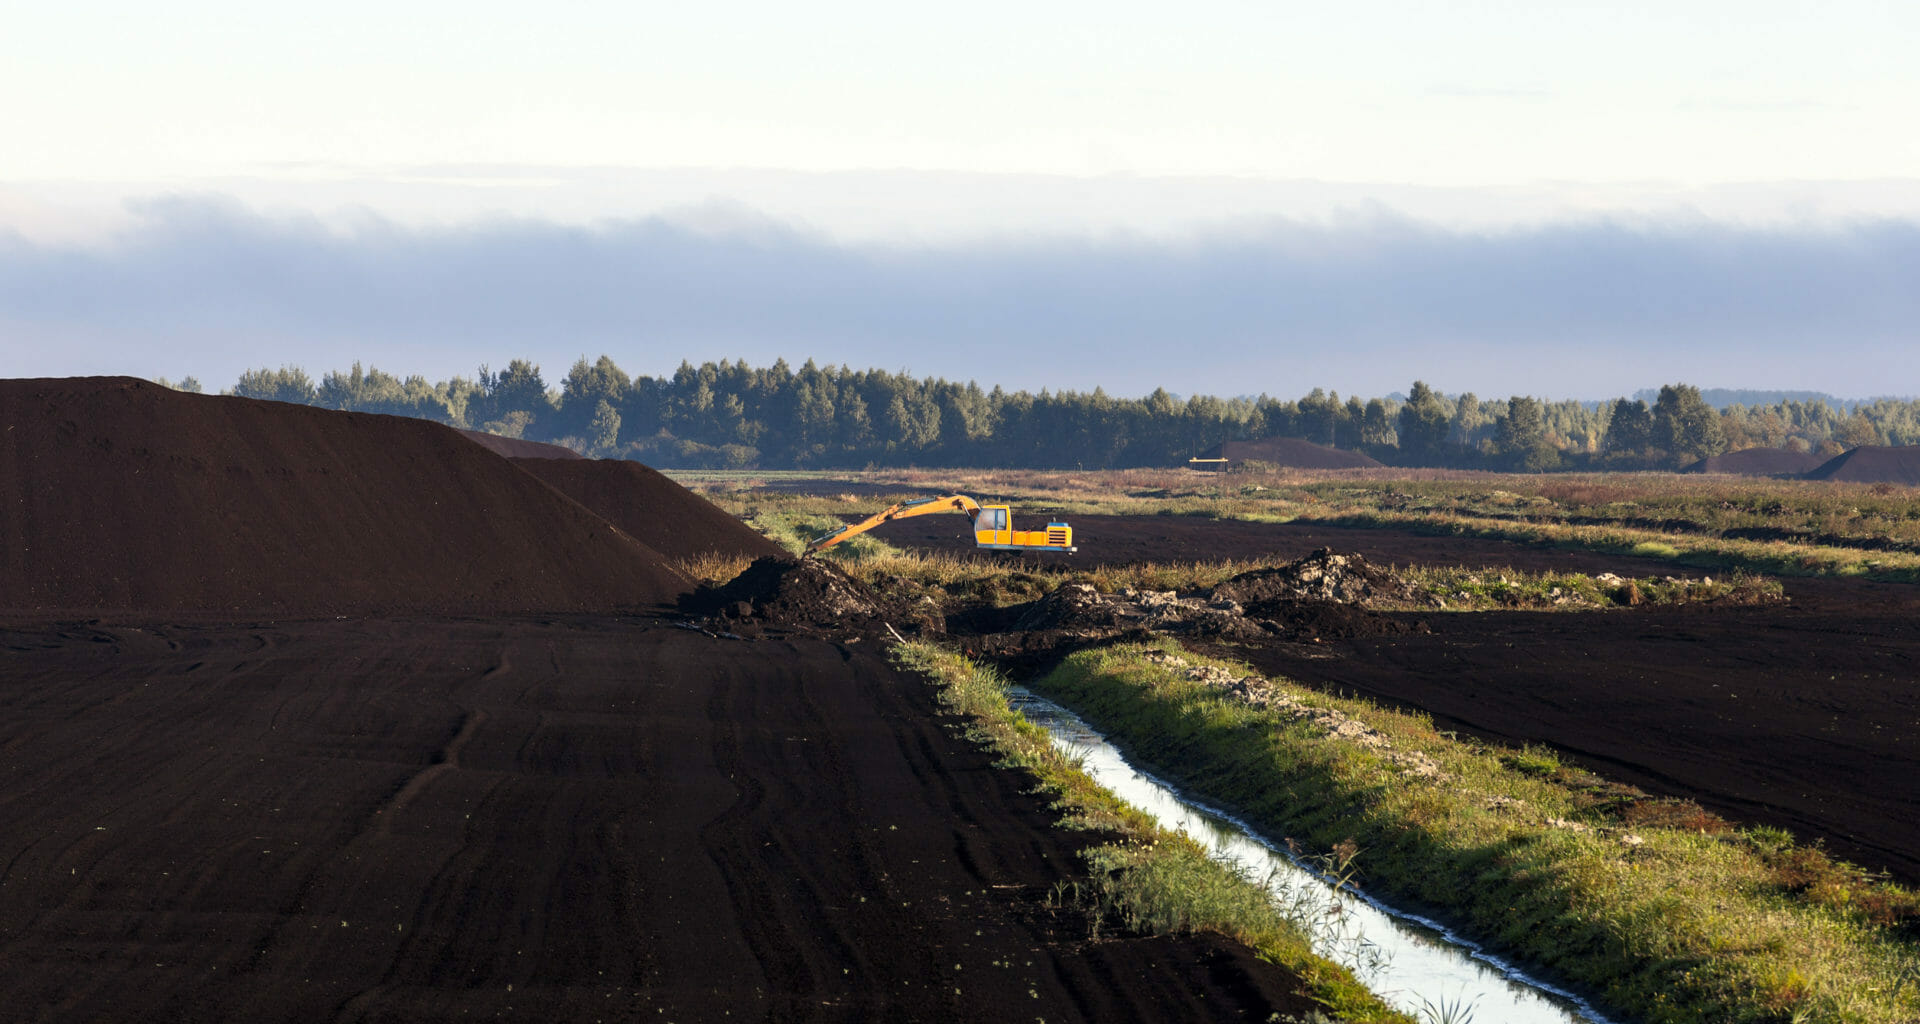 Commercial peat extraction